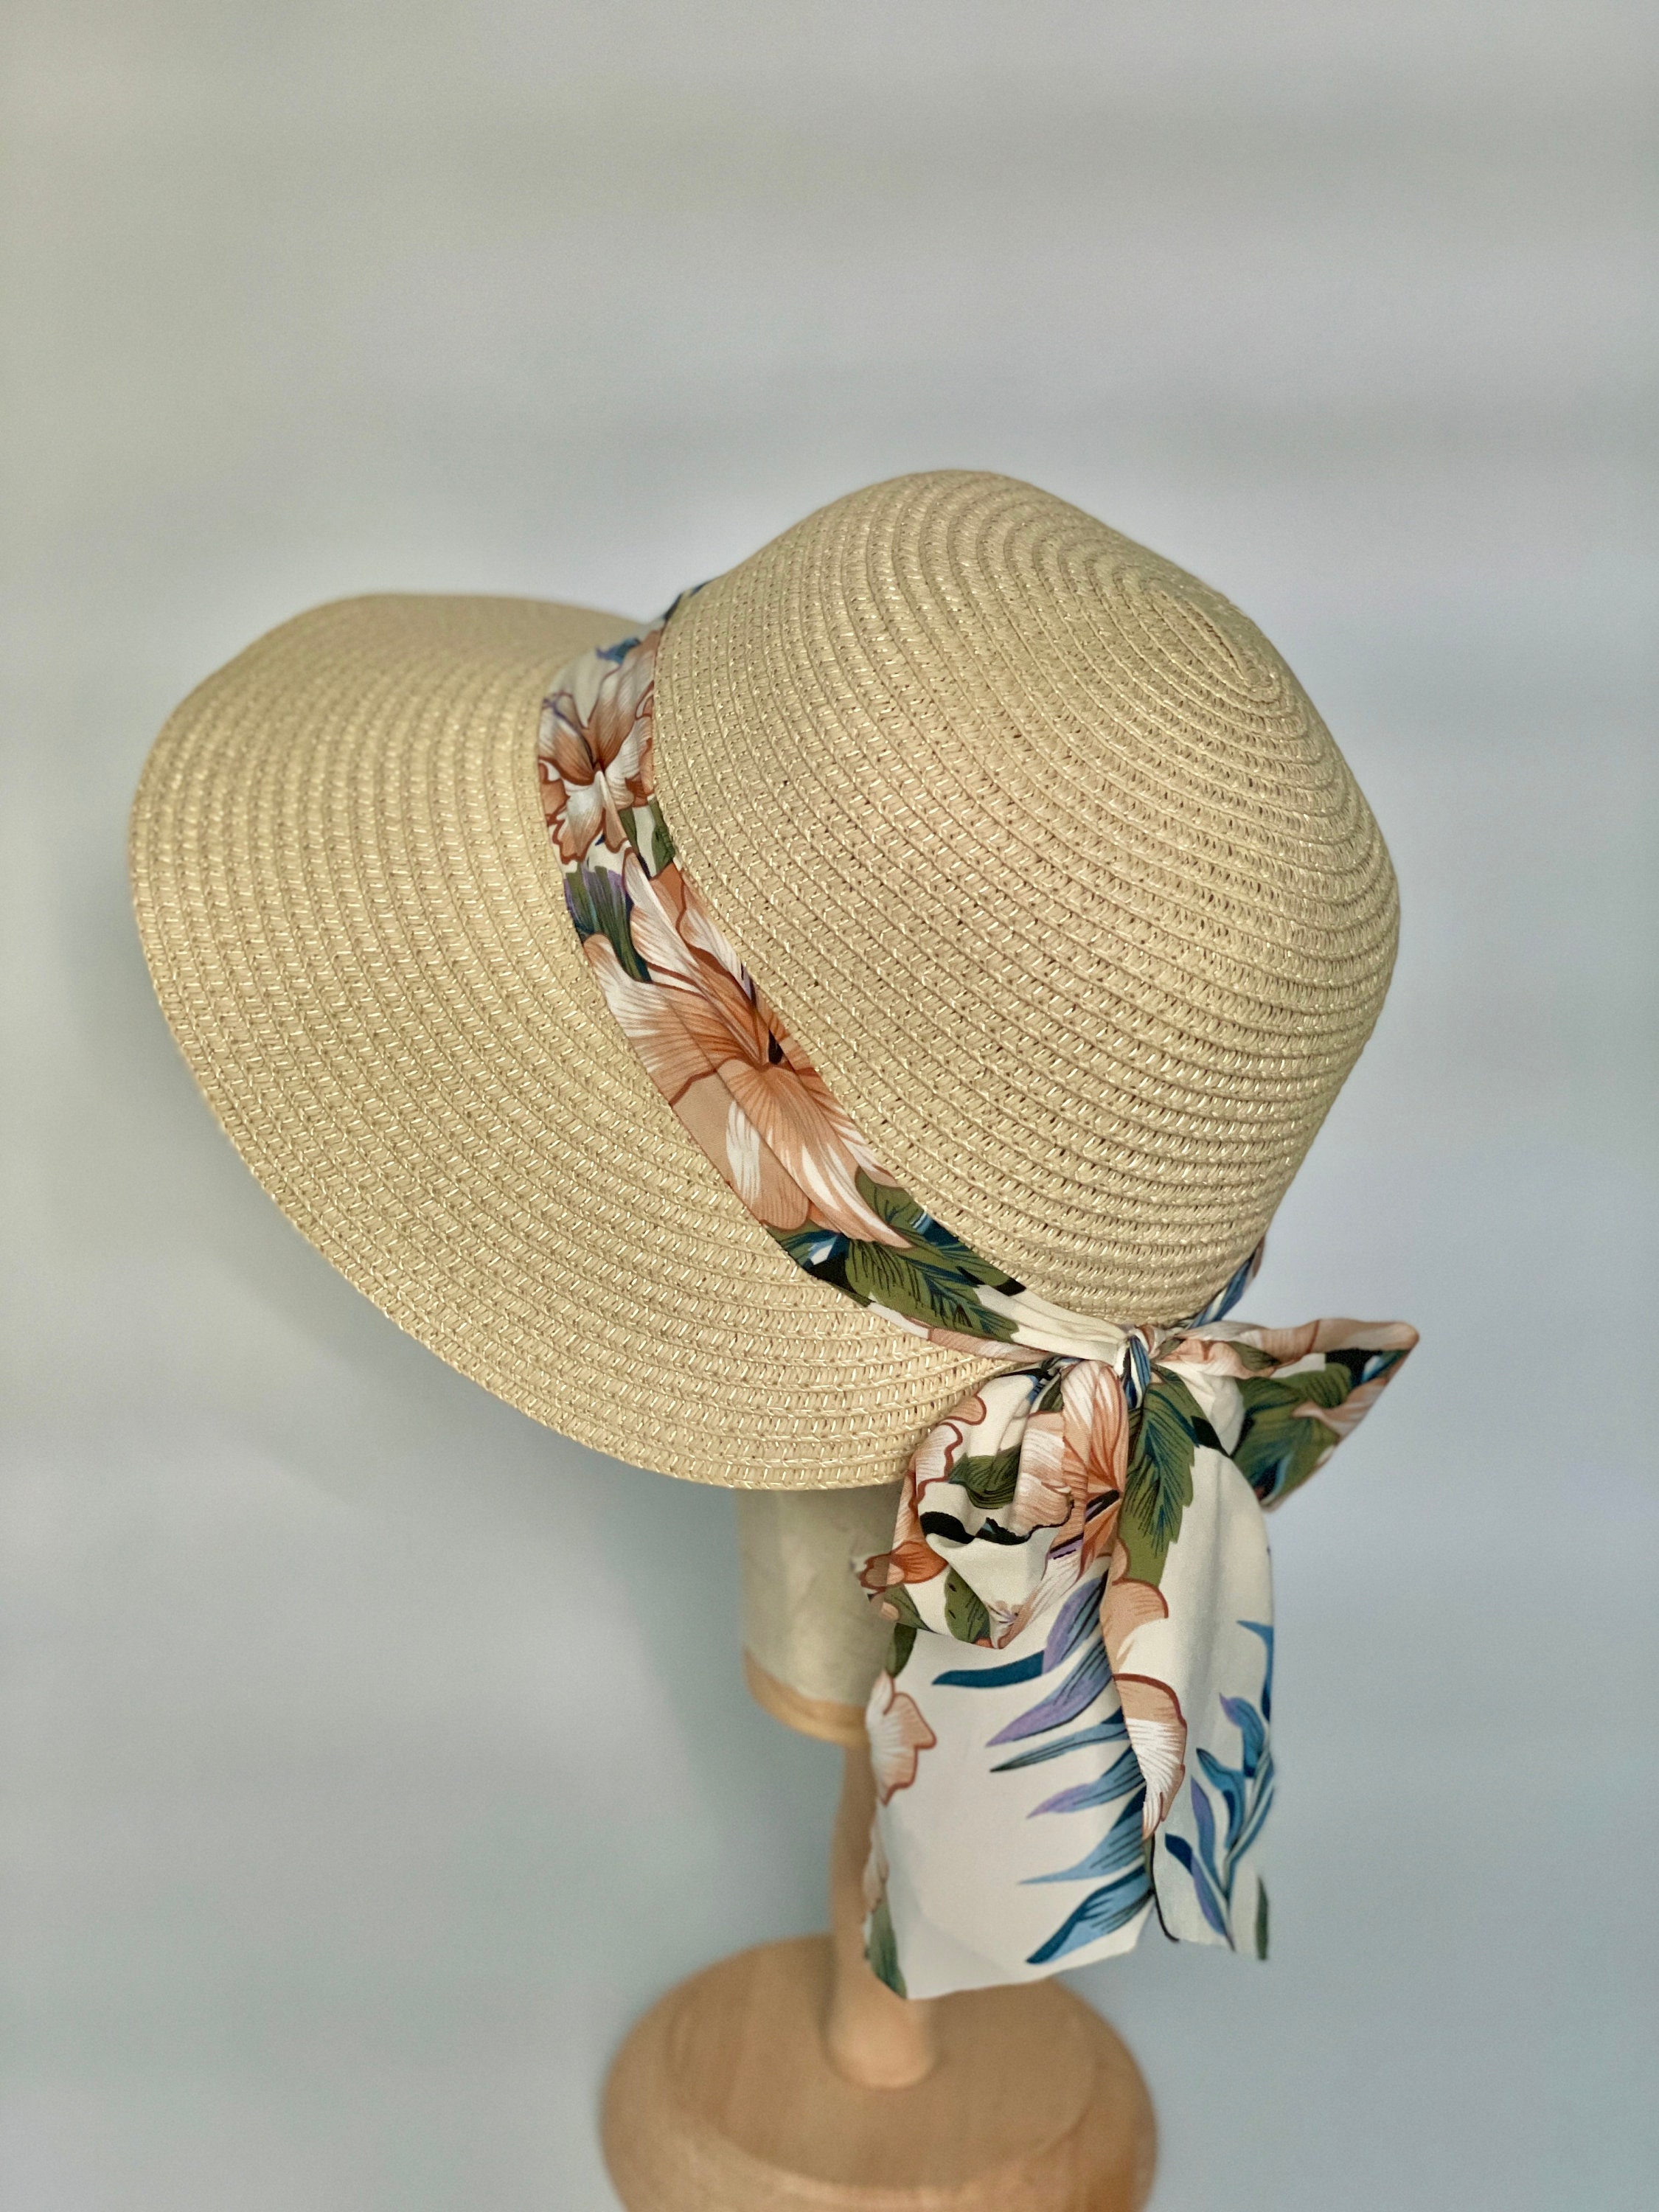 Foldable Big Brim Straw Hat, Summer Beach Hat, Hand Woven Sun Hat, Bohemian  Visor Hat, Summer Holiday Gift for Her Woman 